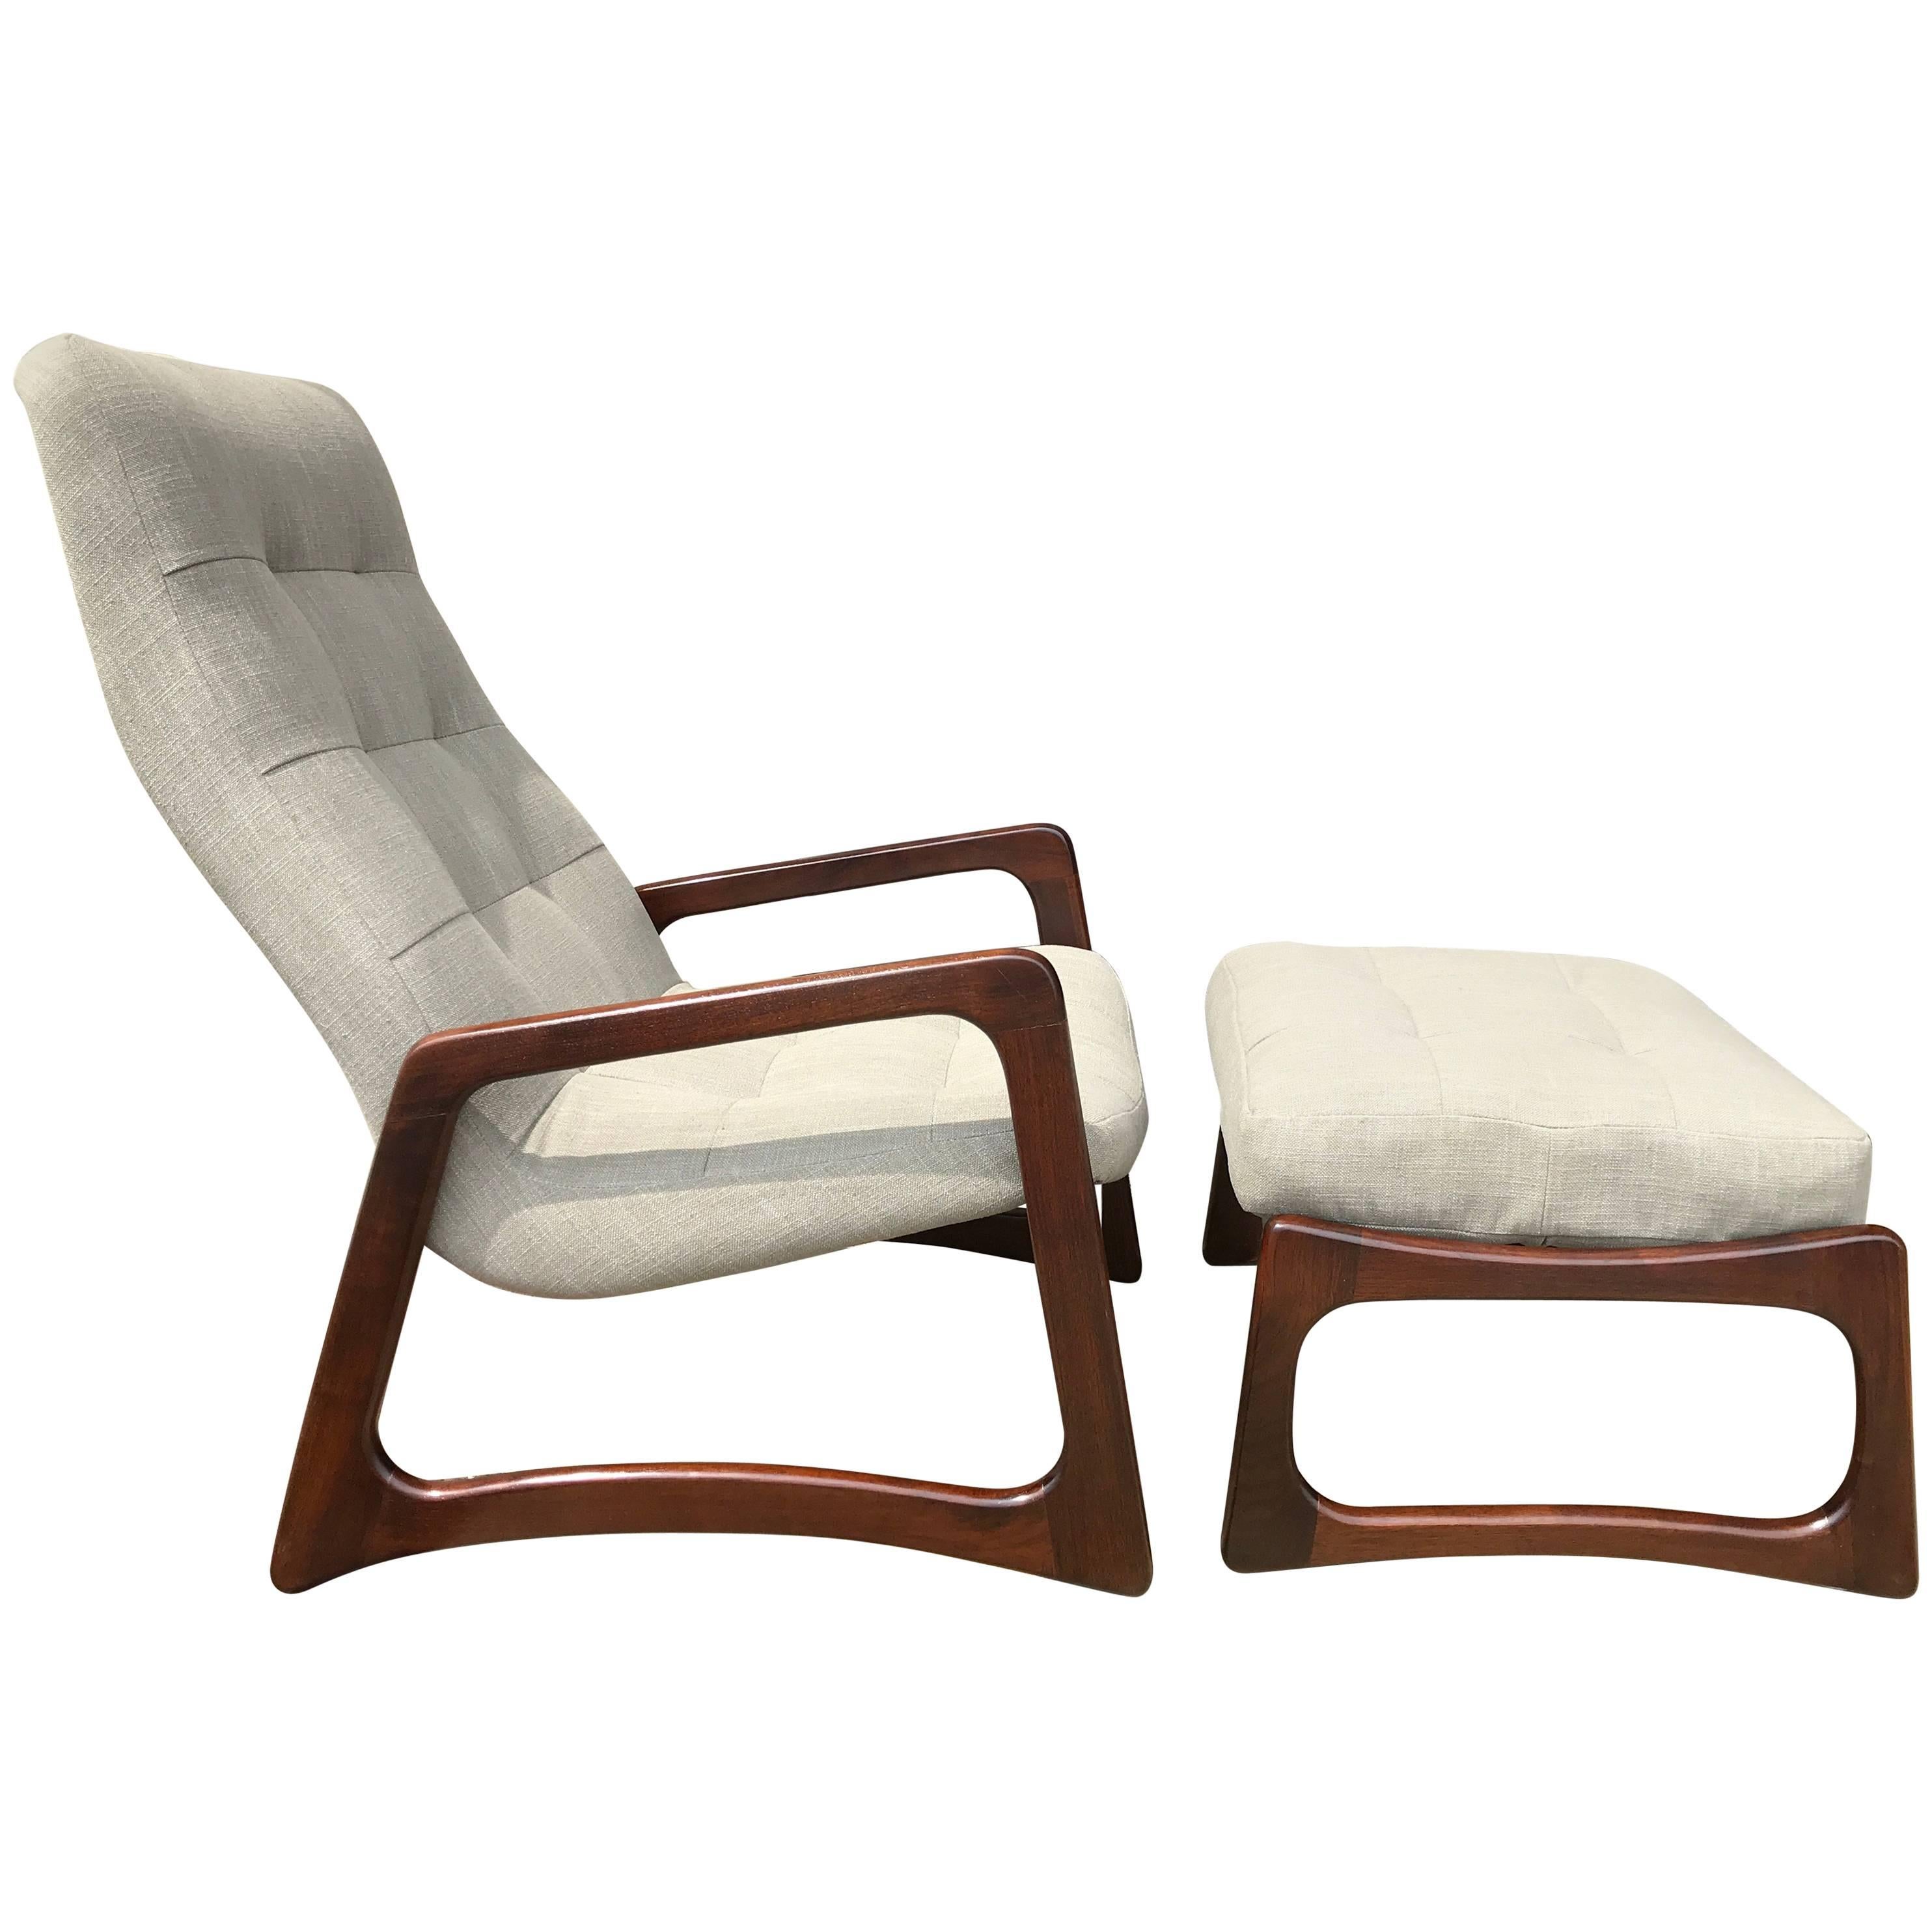 Adrian Pearsall Lounge Chair and Ottoman for Craft Associates, Restored